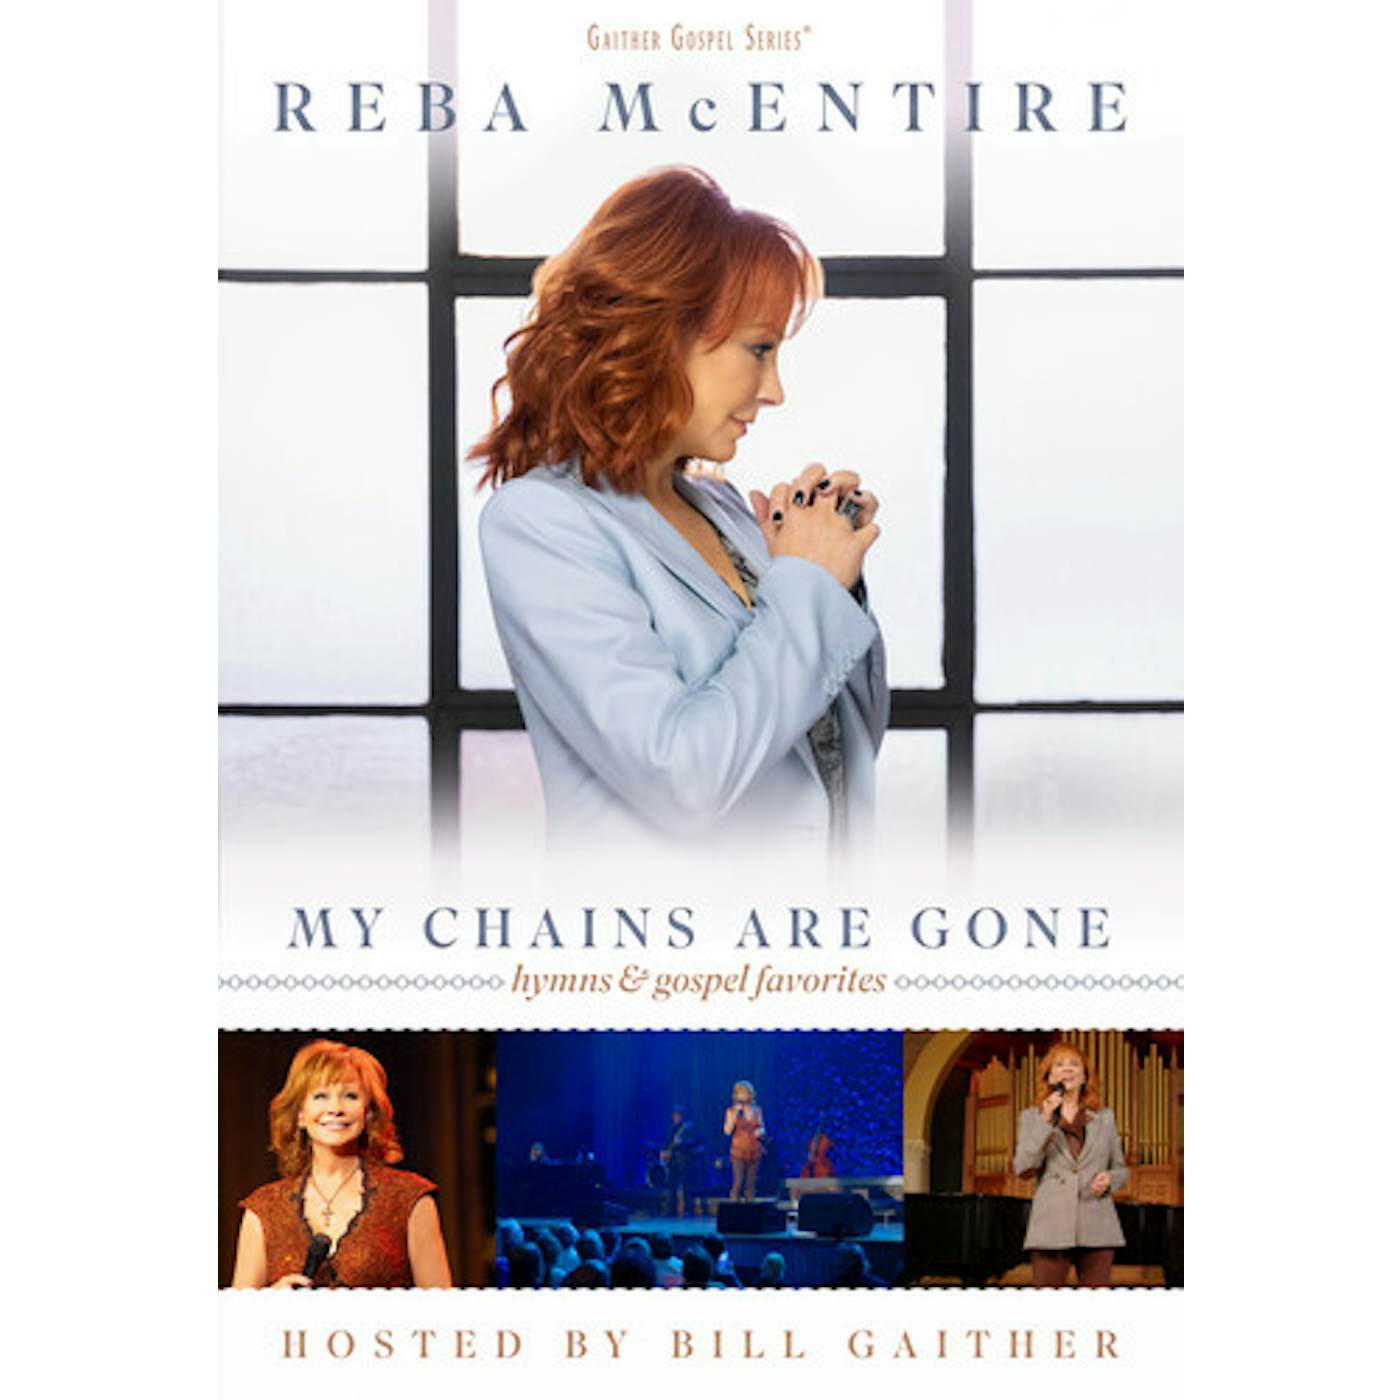 Reba McEntire MY CHAINS ARE GONE: HYMNS & GOSPEL FAVORITES DVD